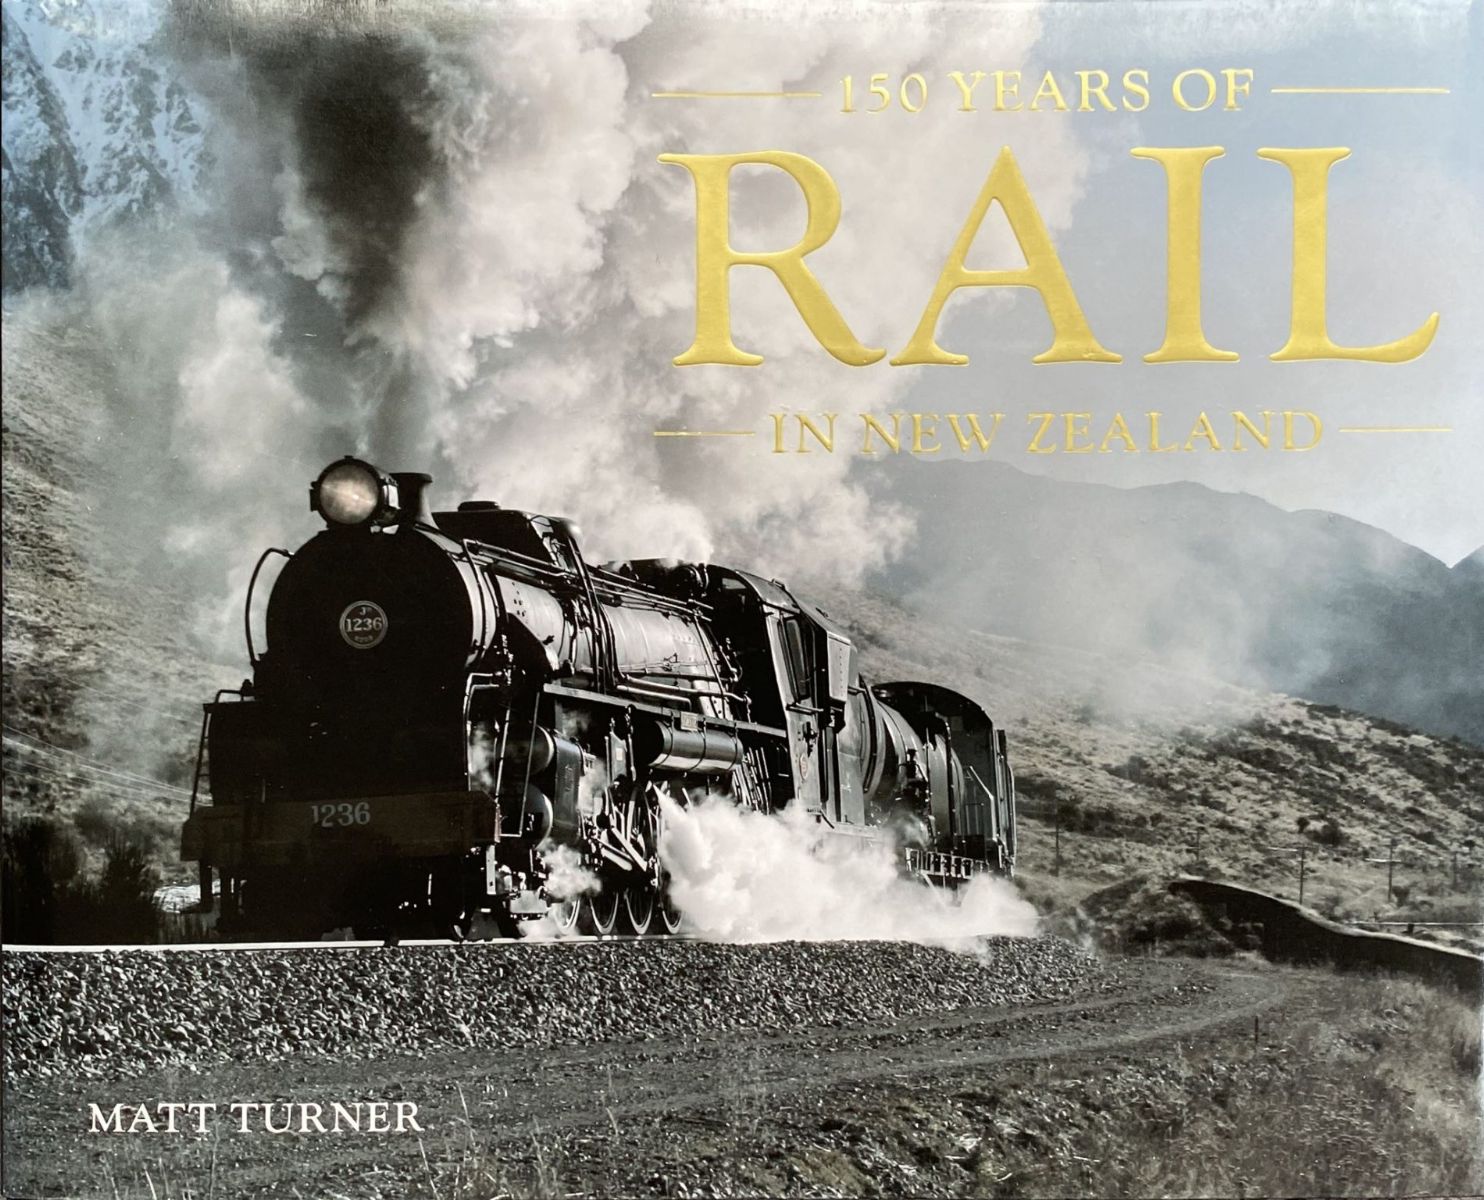 150 YEARS OF RAIL IN NEW ZEALAND